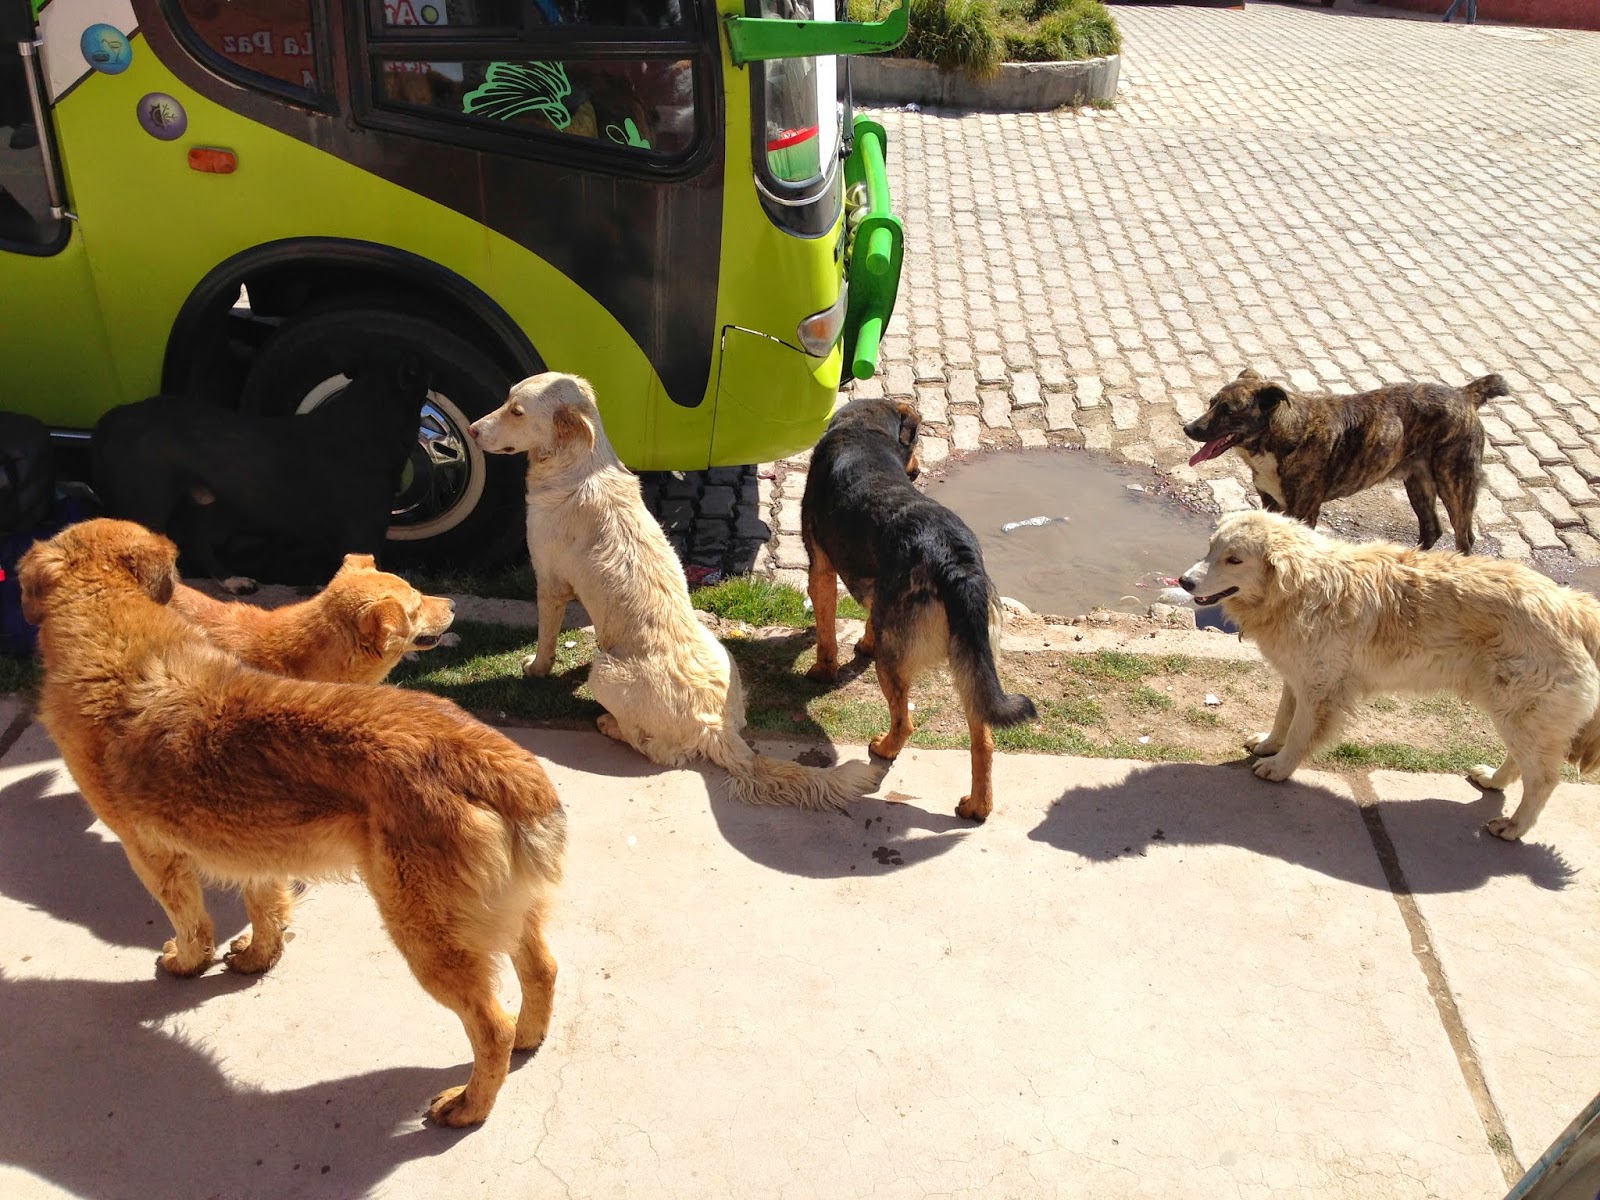 A pack of stray dogs kept us entertained while we waited for the bus we weren't sure was ever going to show up.